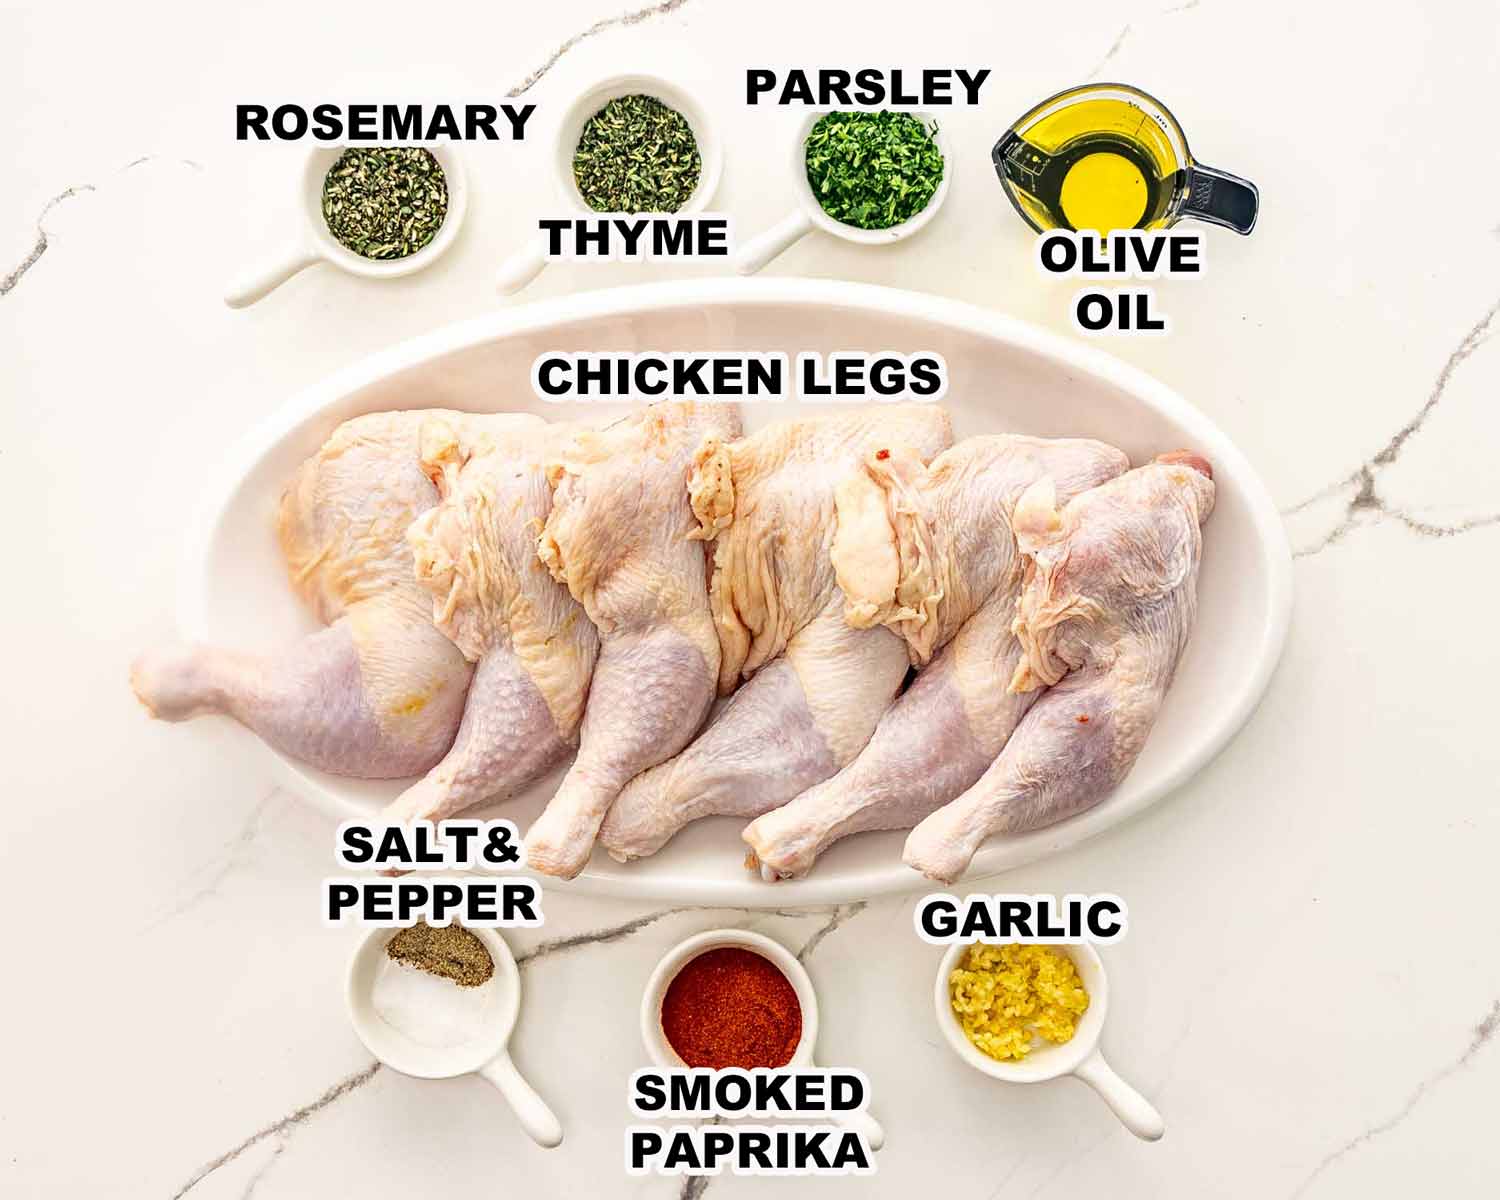 ingredients needed to make baked chicken legs.